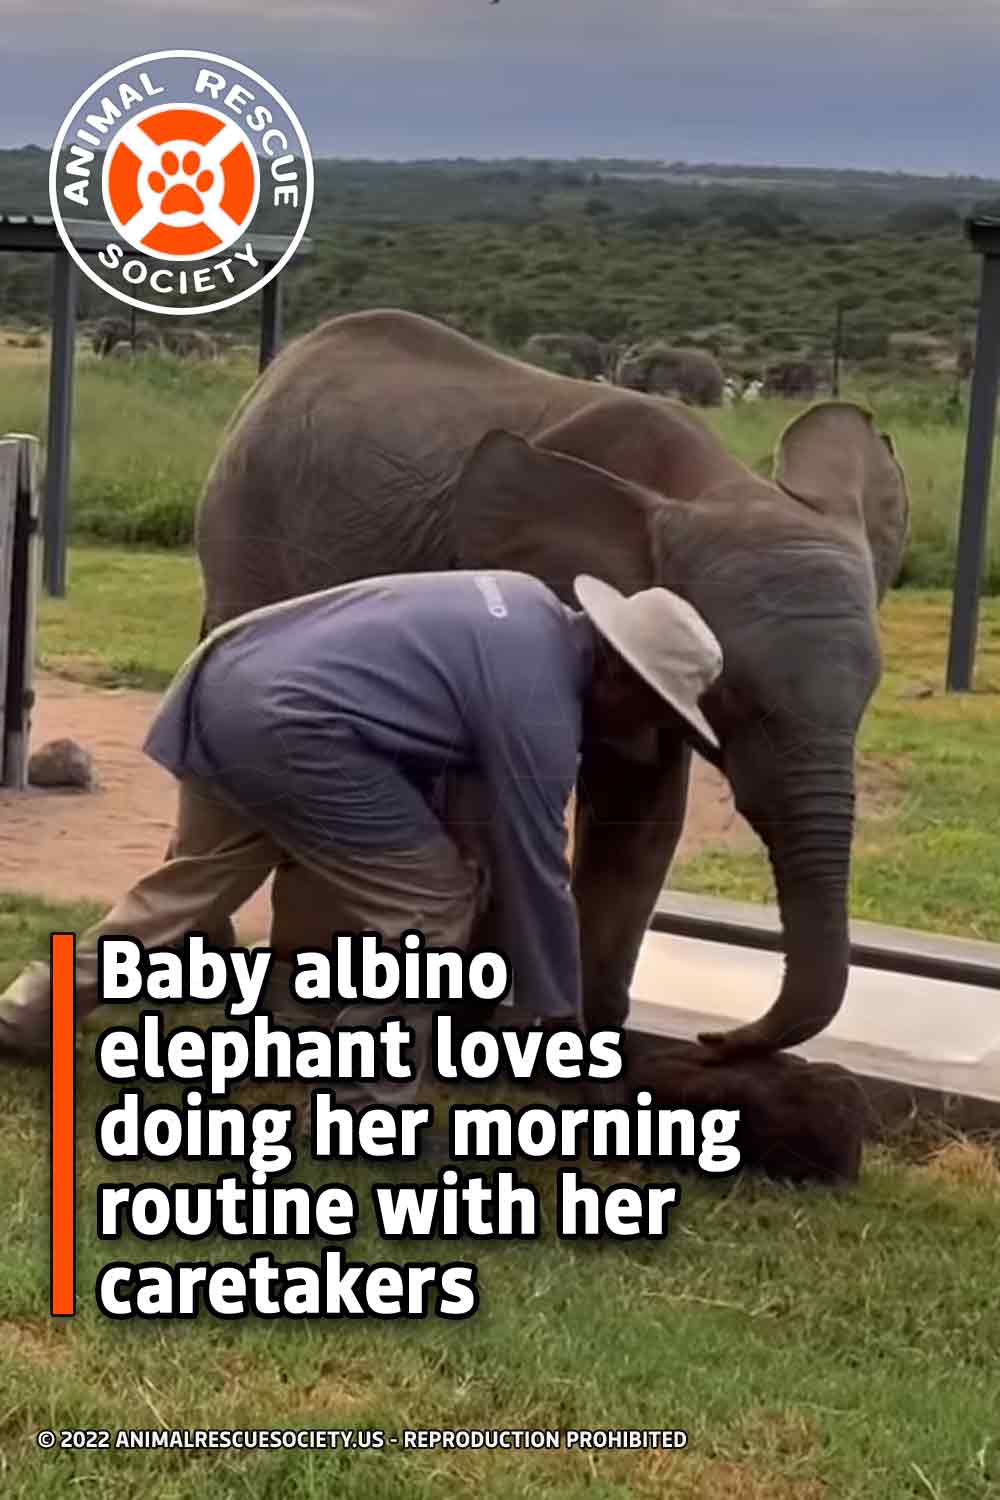 Baby albino elephant loves doing her morning routine with her caretakers